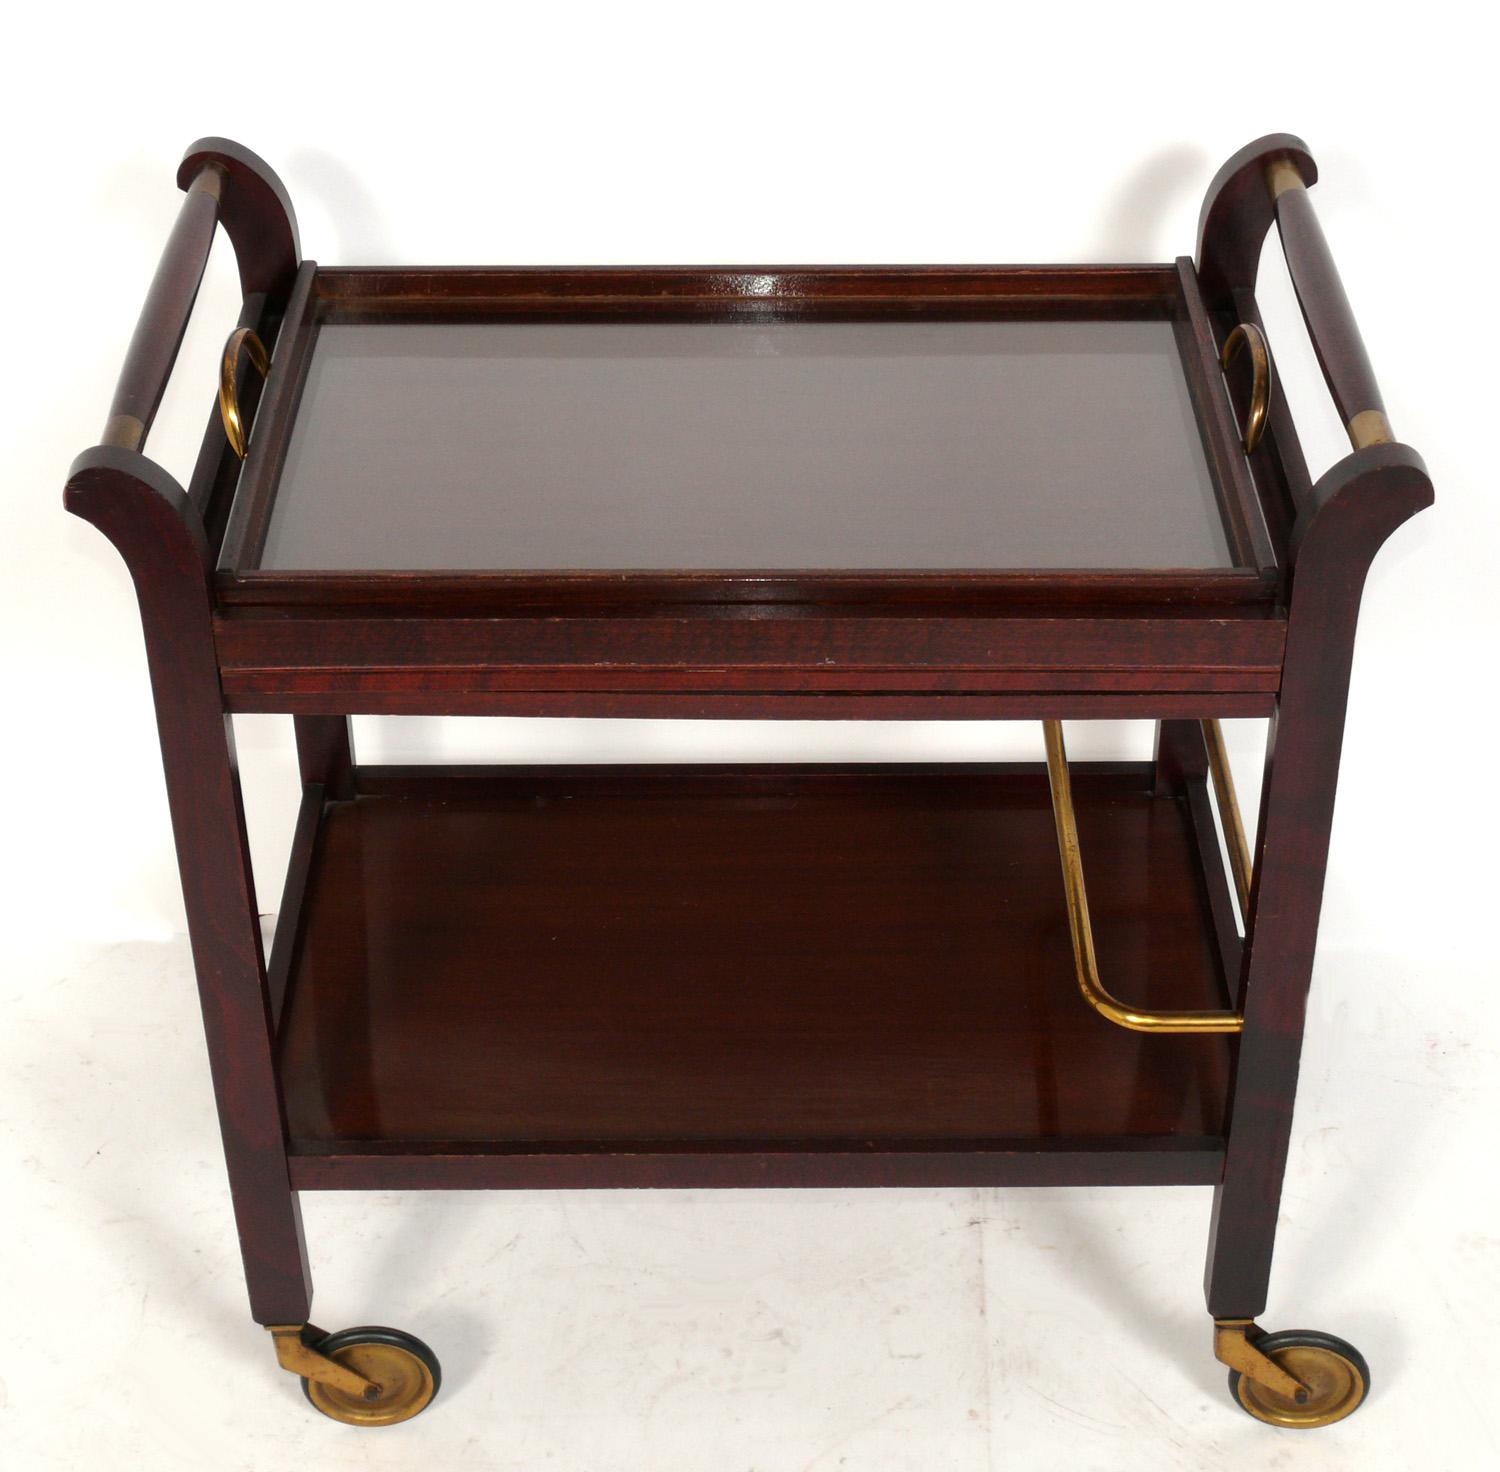 Clean lined Italian bar cart, Italy, circa 1950s. Retain original removable serving tray.